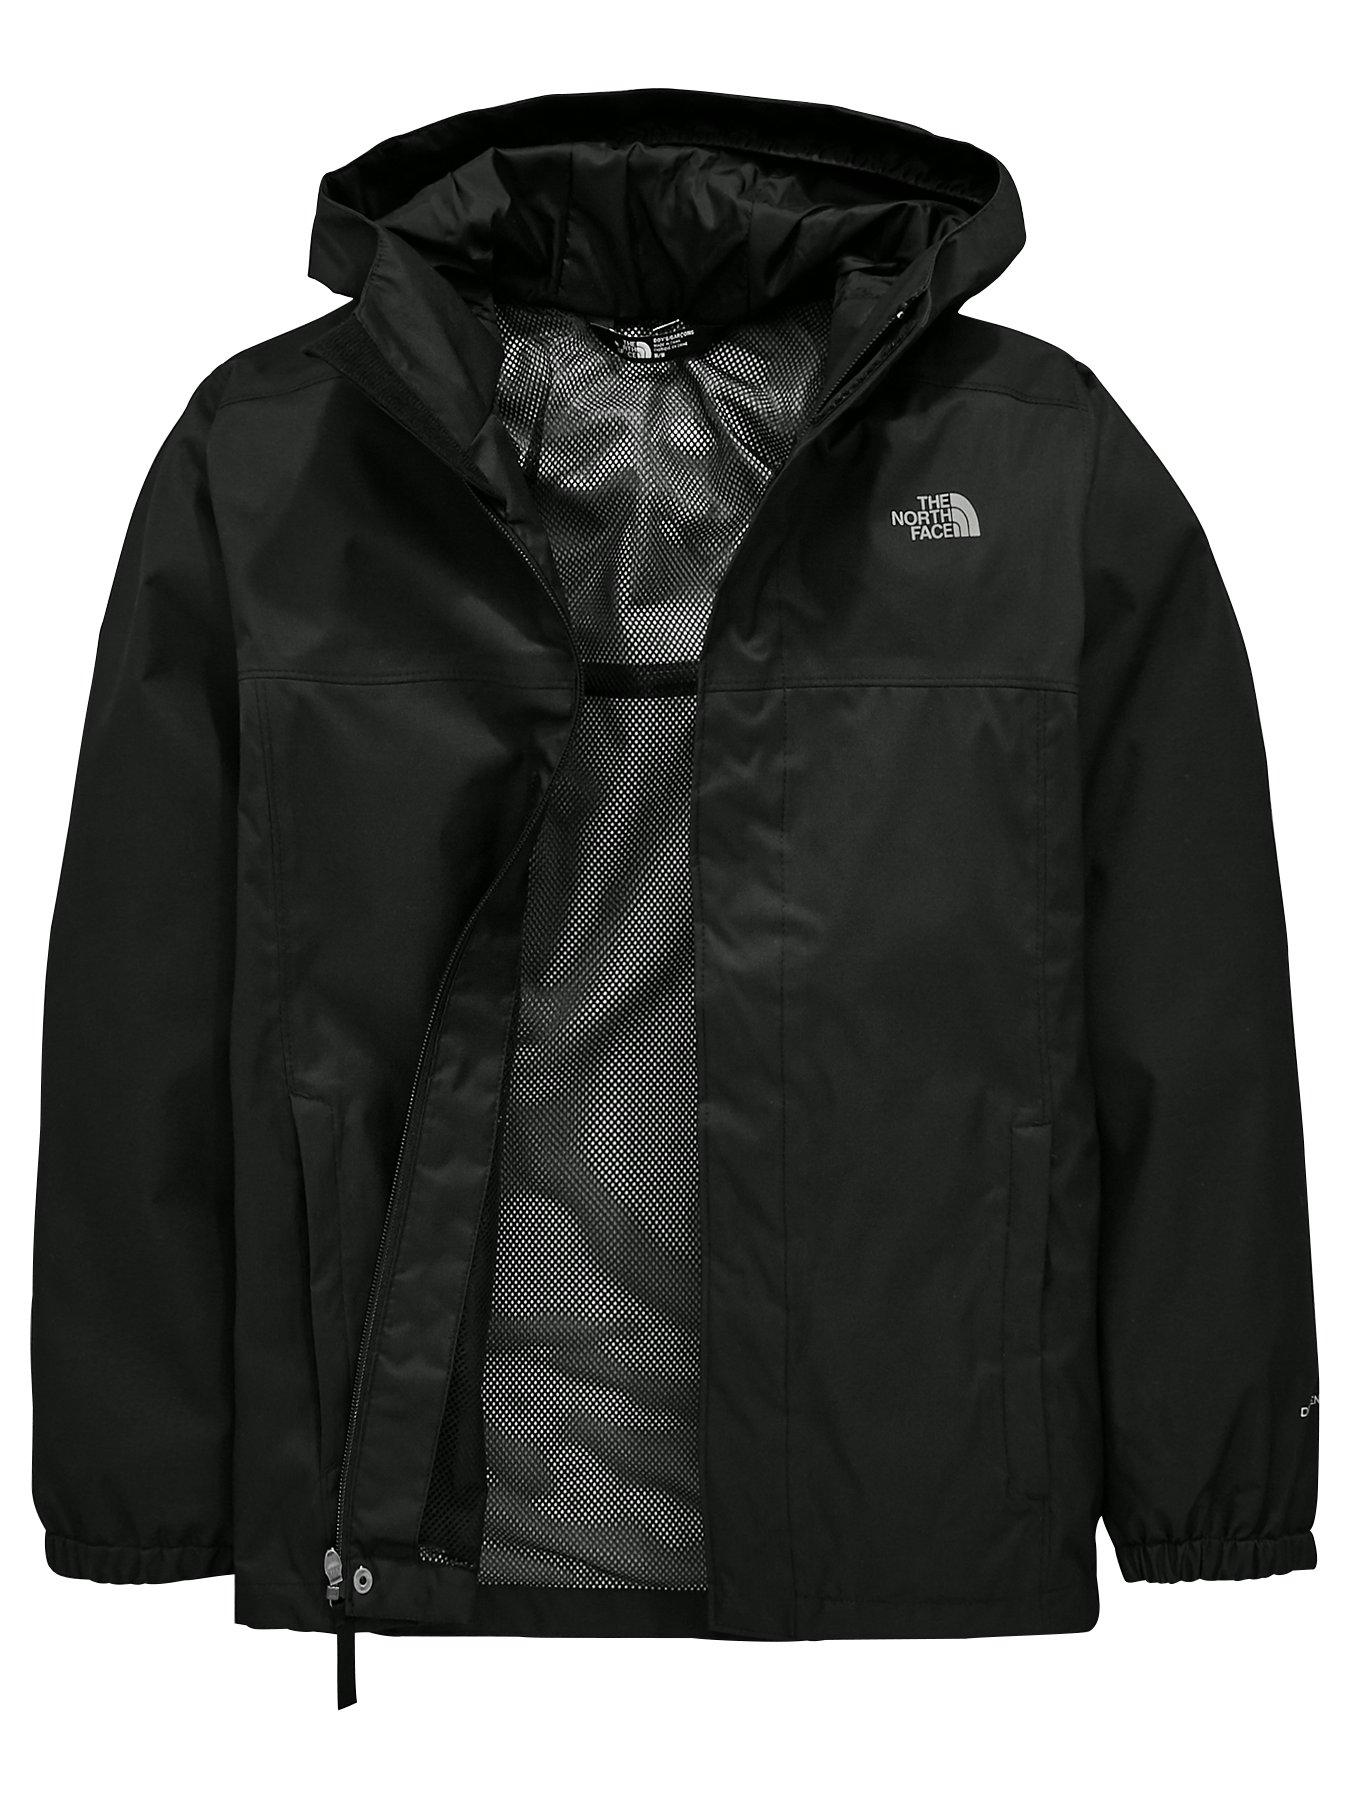 black north face jacket with hood